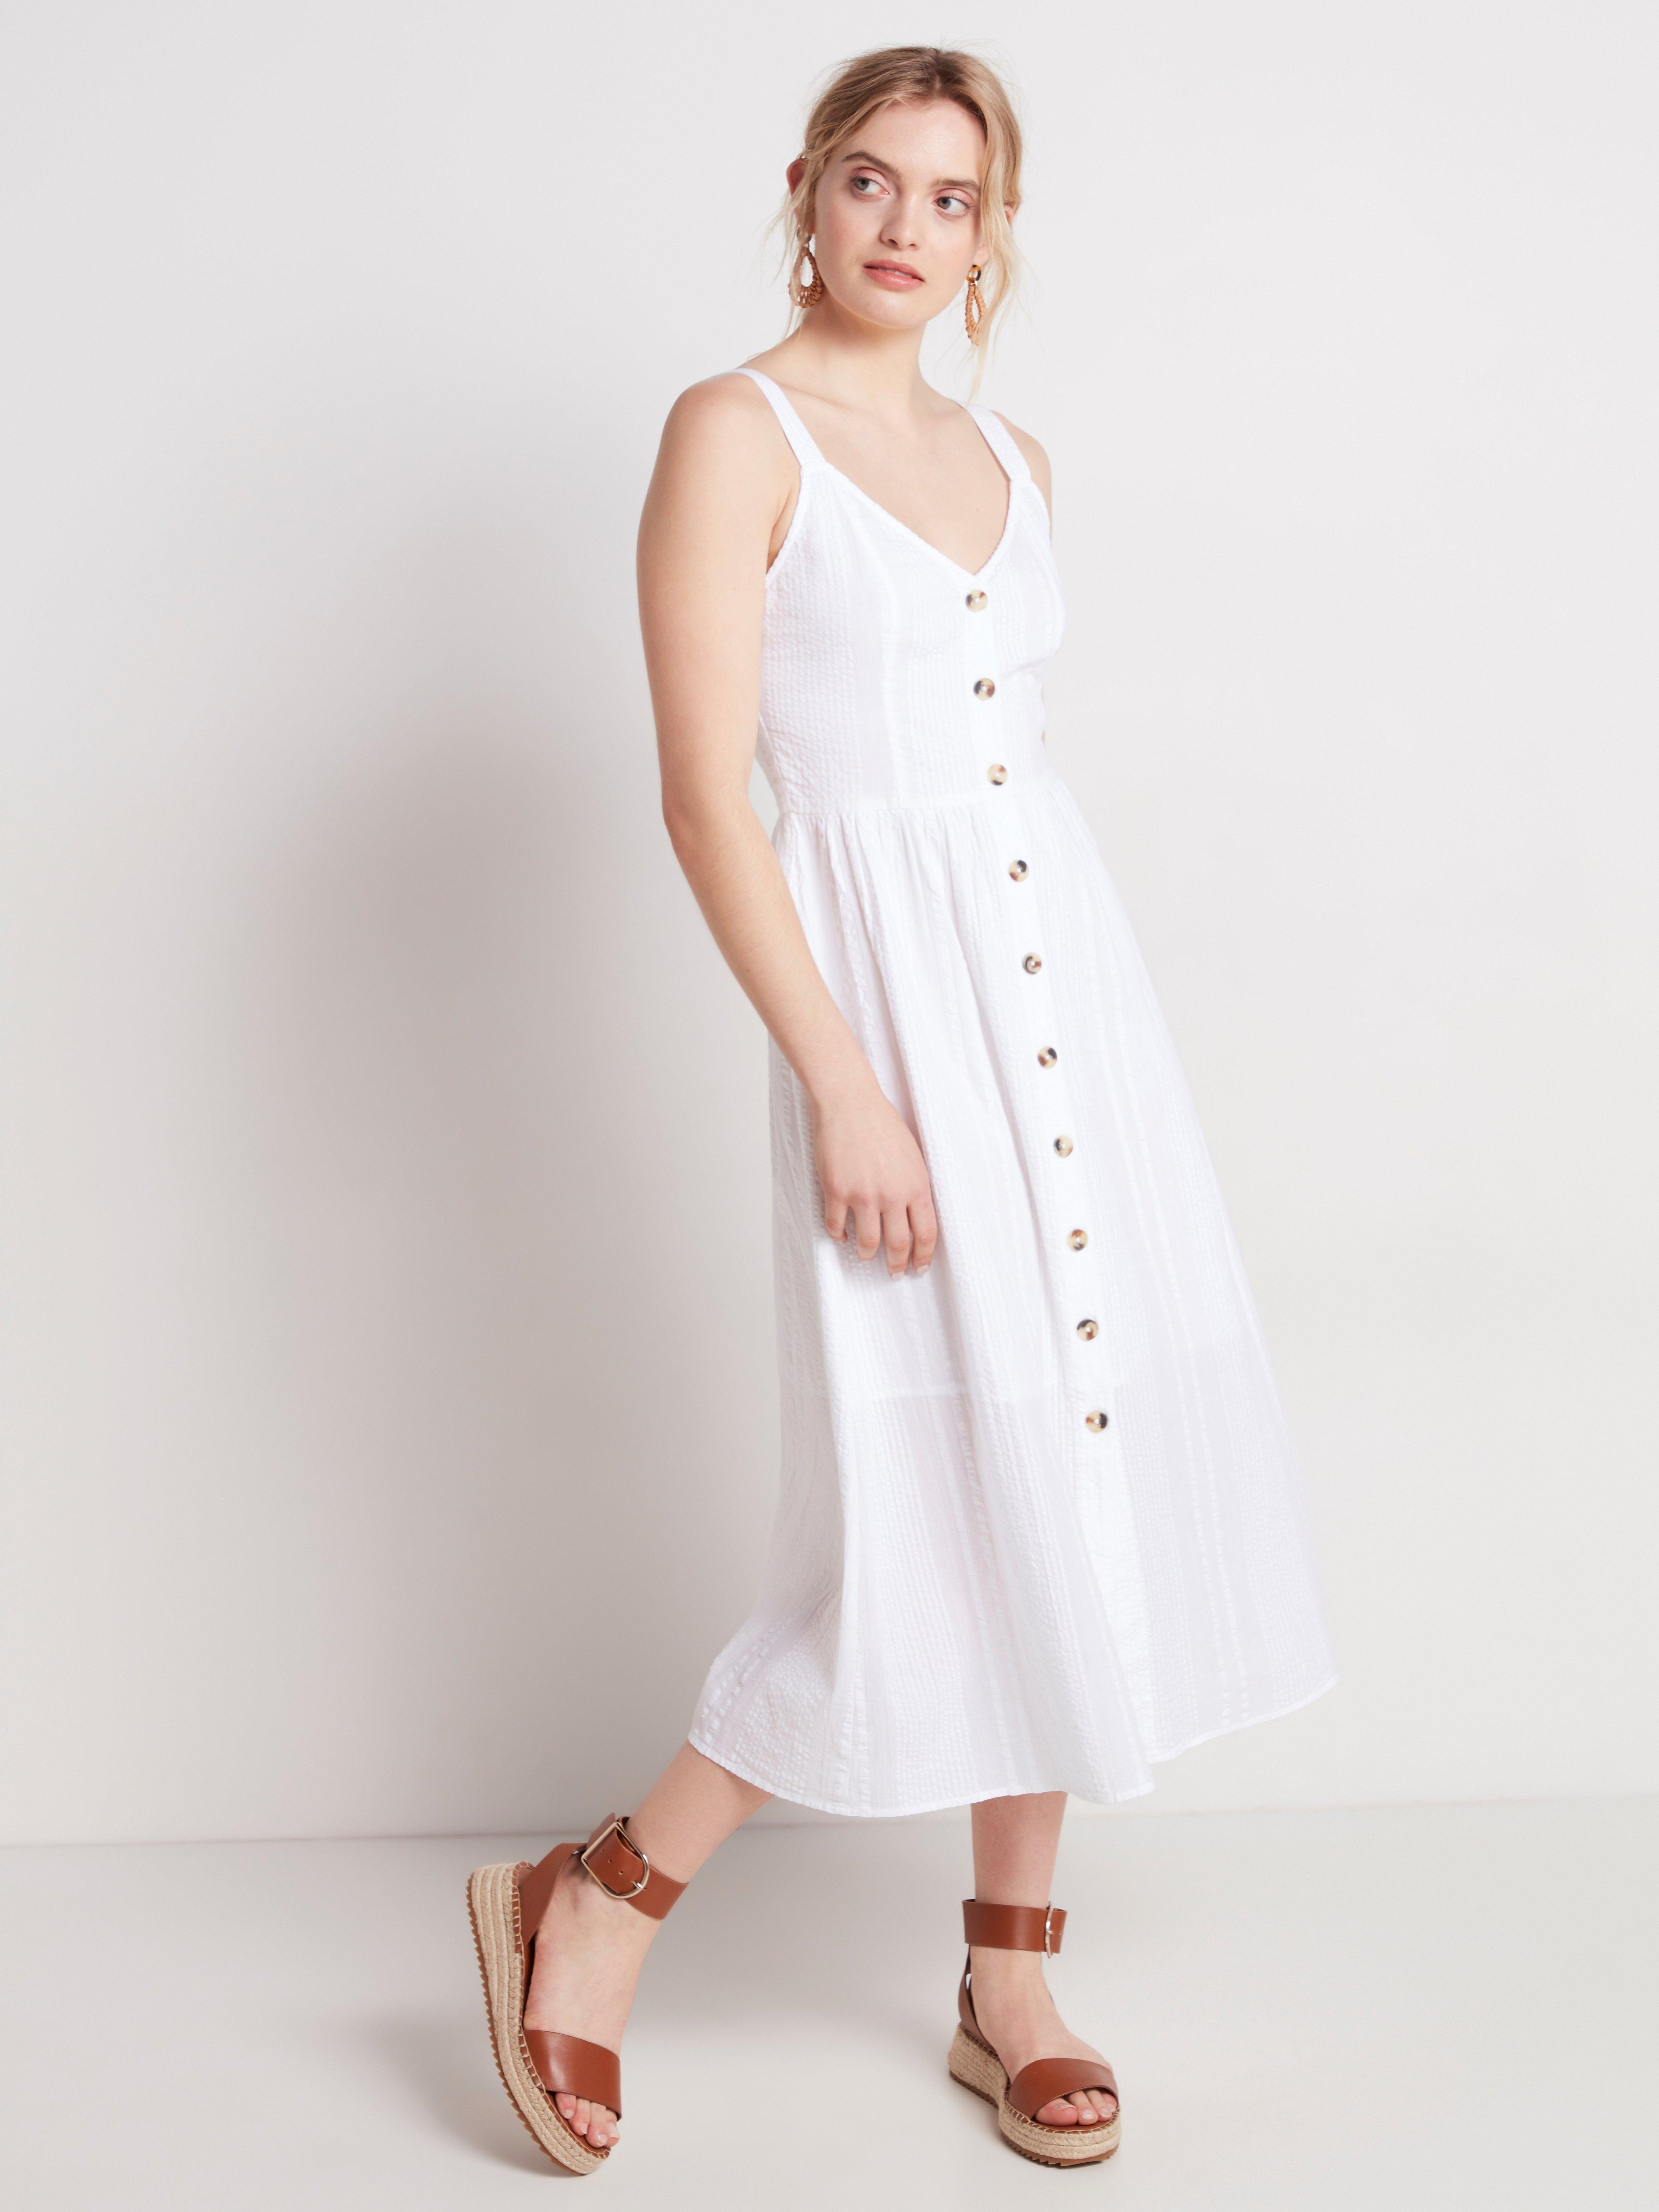 white dress with buttons